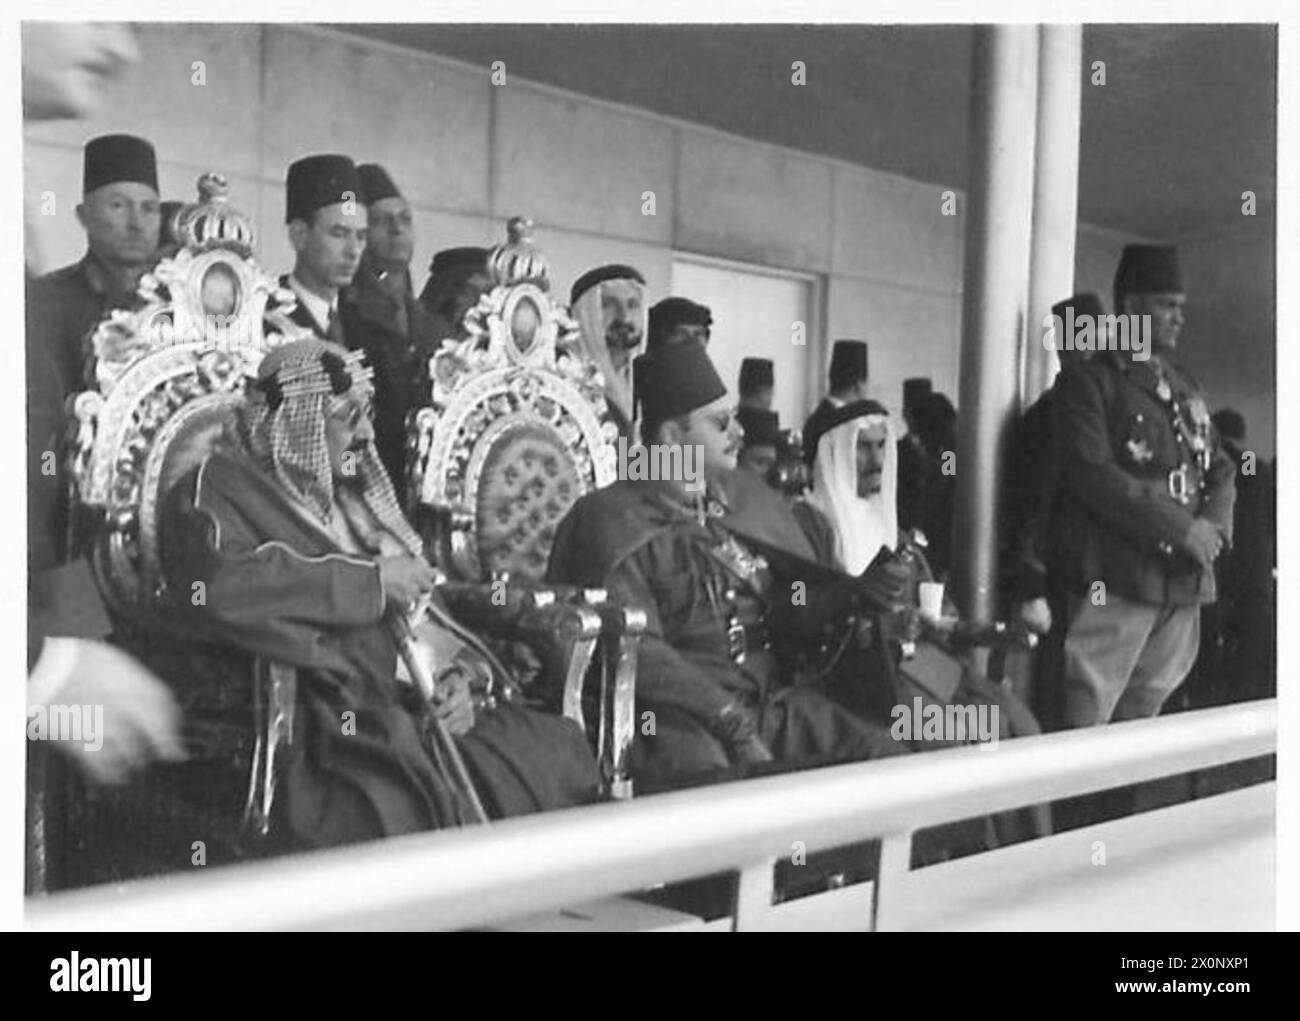 KING IBN SAUD SEES EGYPT'S MILITARY MIGHT - King 'Abd al-'Aziz Ibn Saud of Saudia Arabia and King Farouk of Egypt, watch the parade from the royal dais Stock Photo